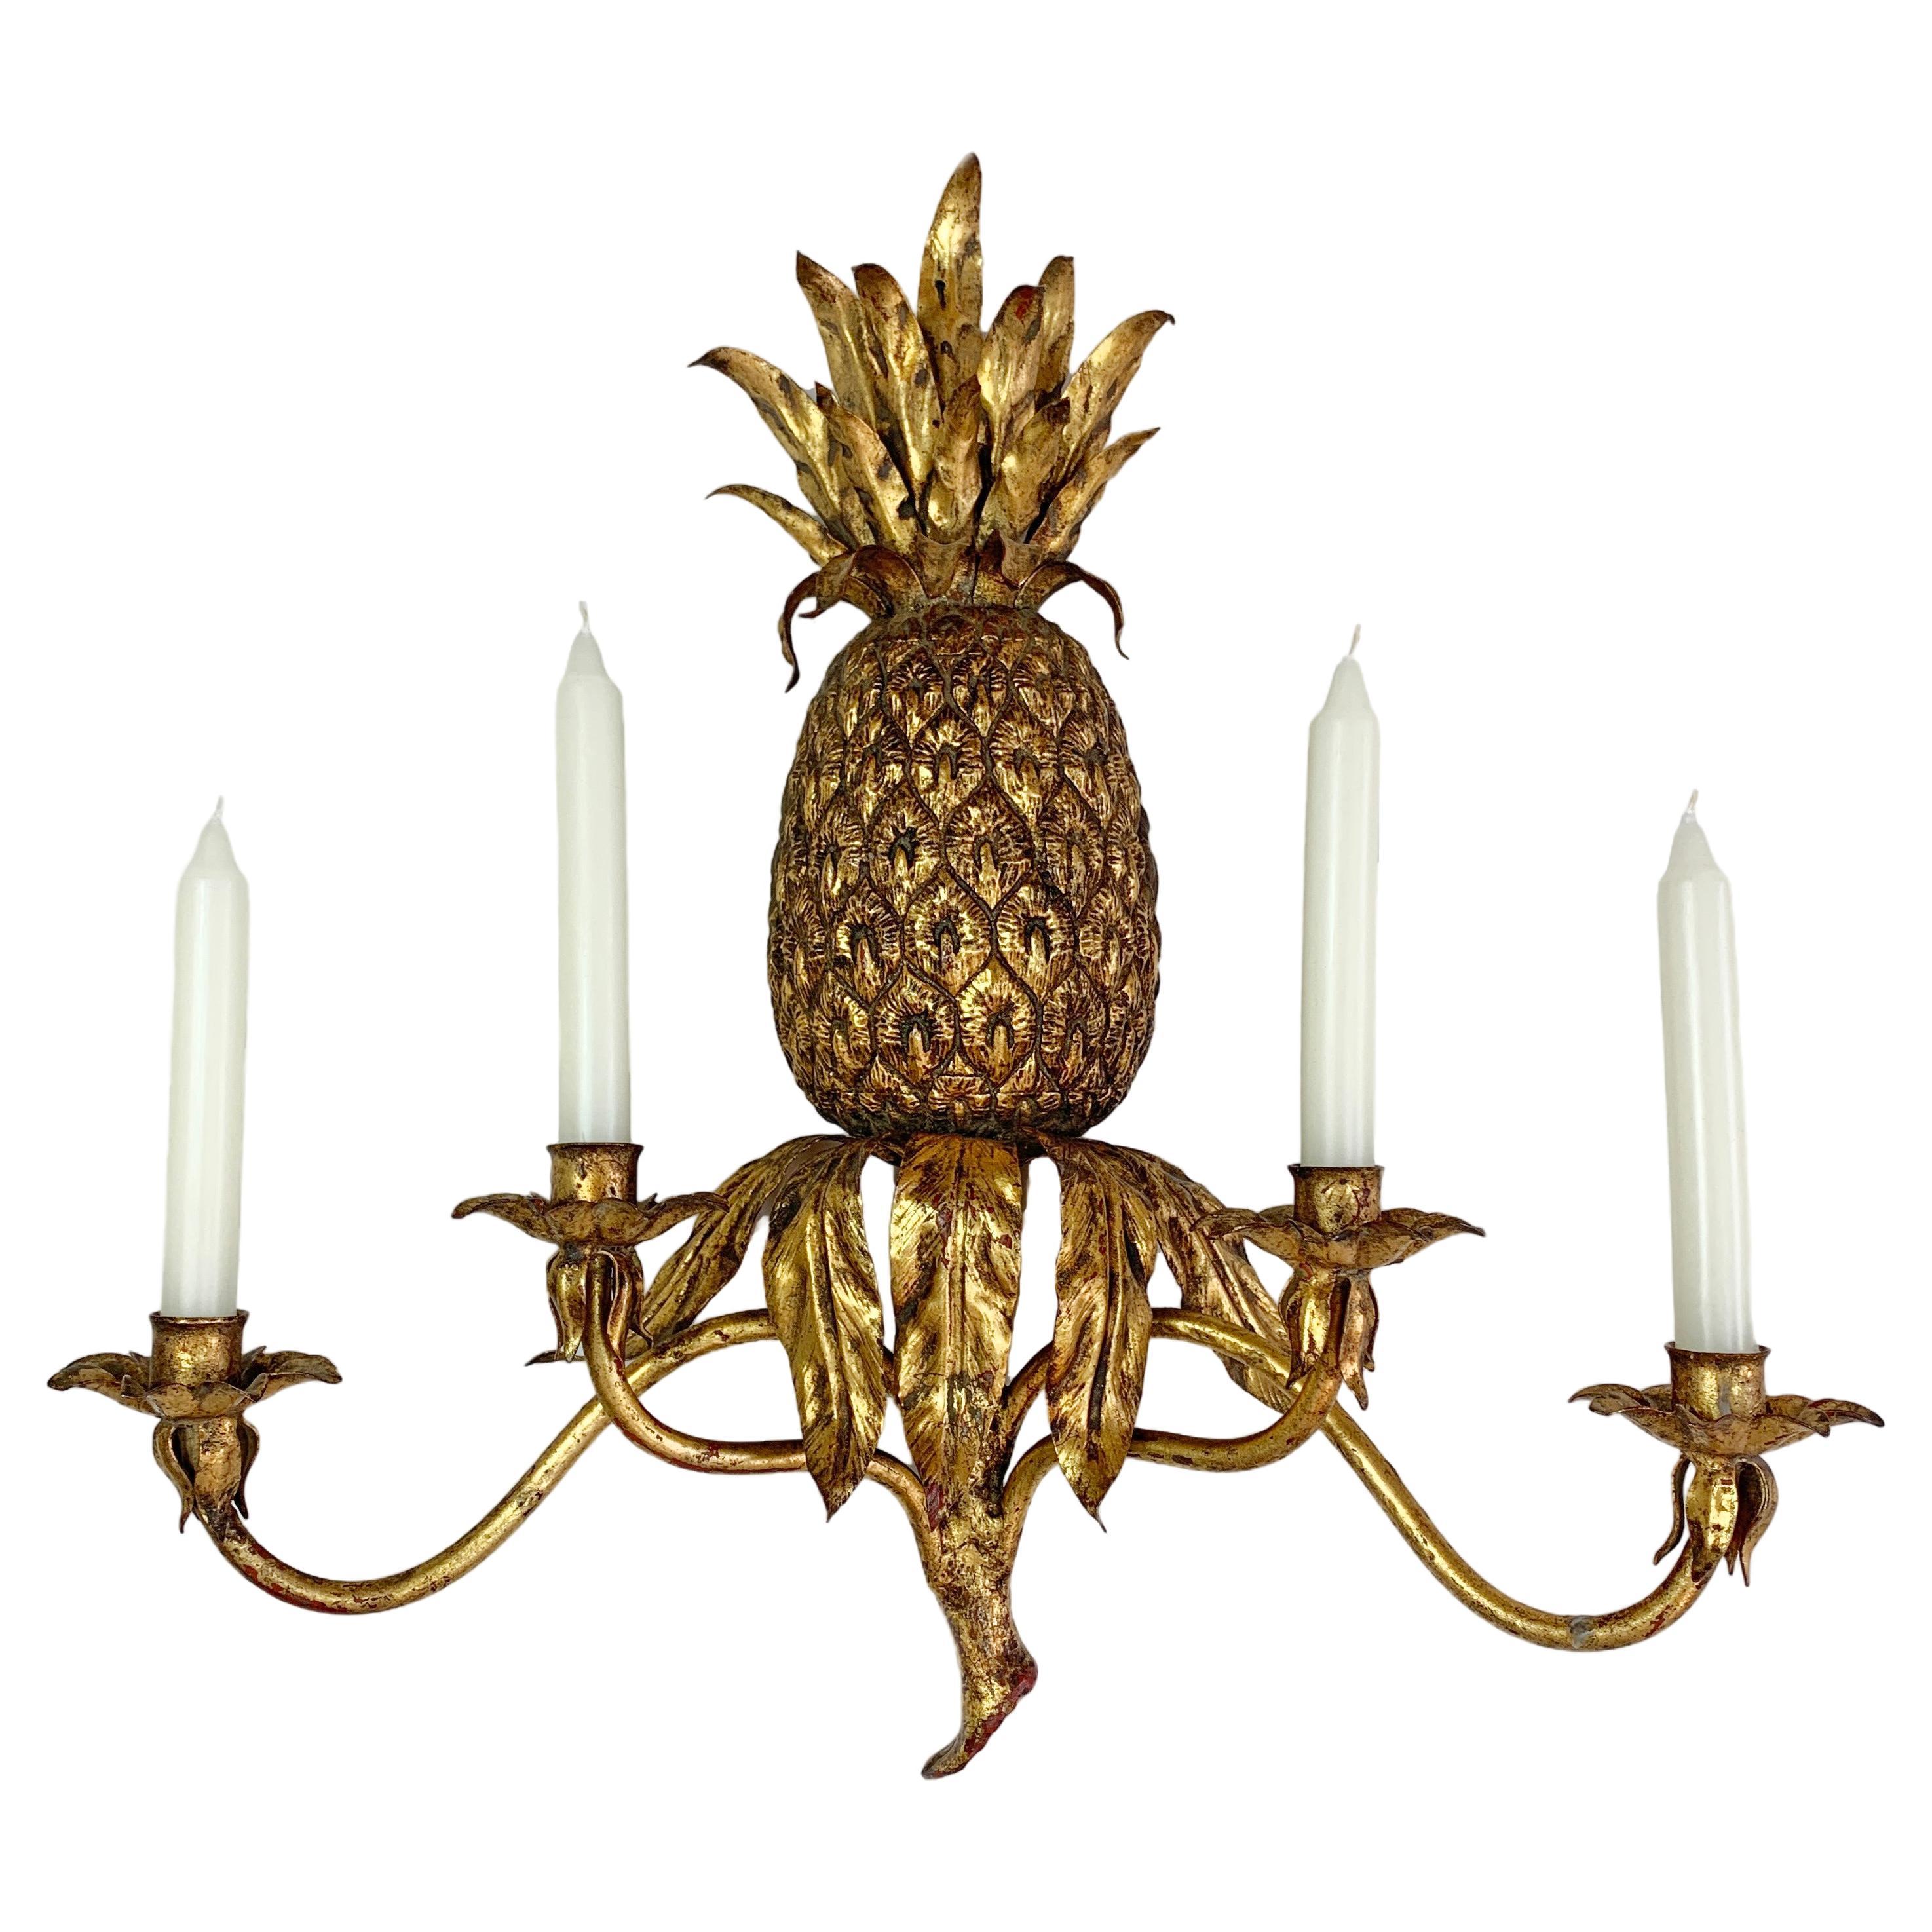 Italian Pineapple Candle Wall Sconce 1950’s Gold Wrought Iron 